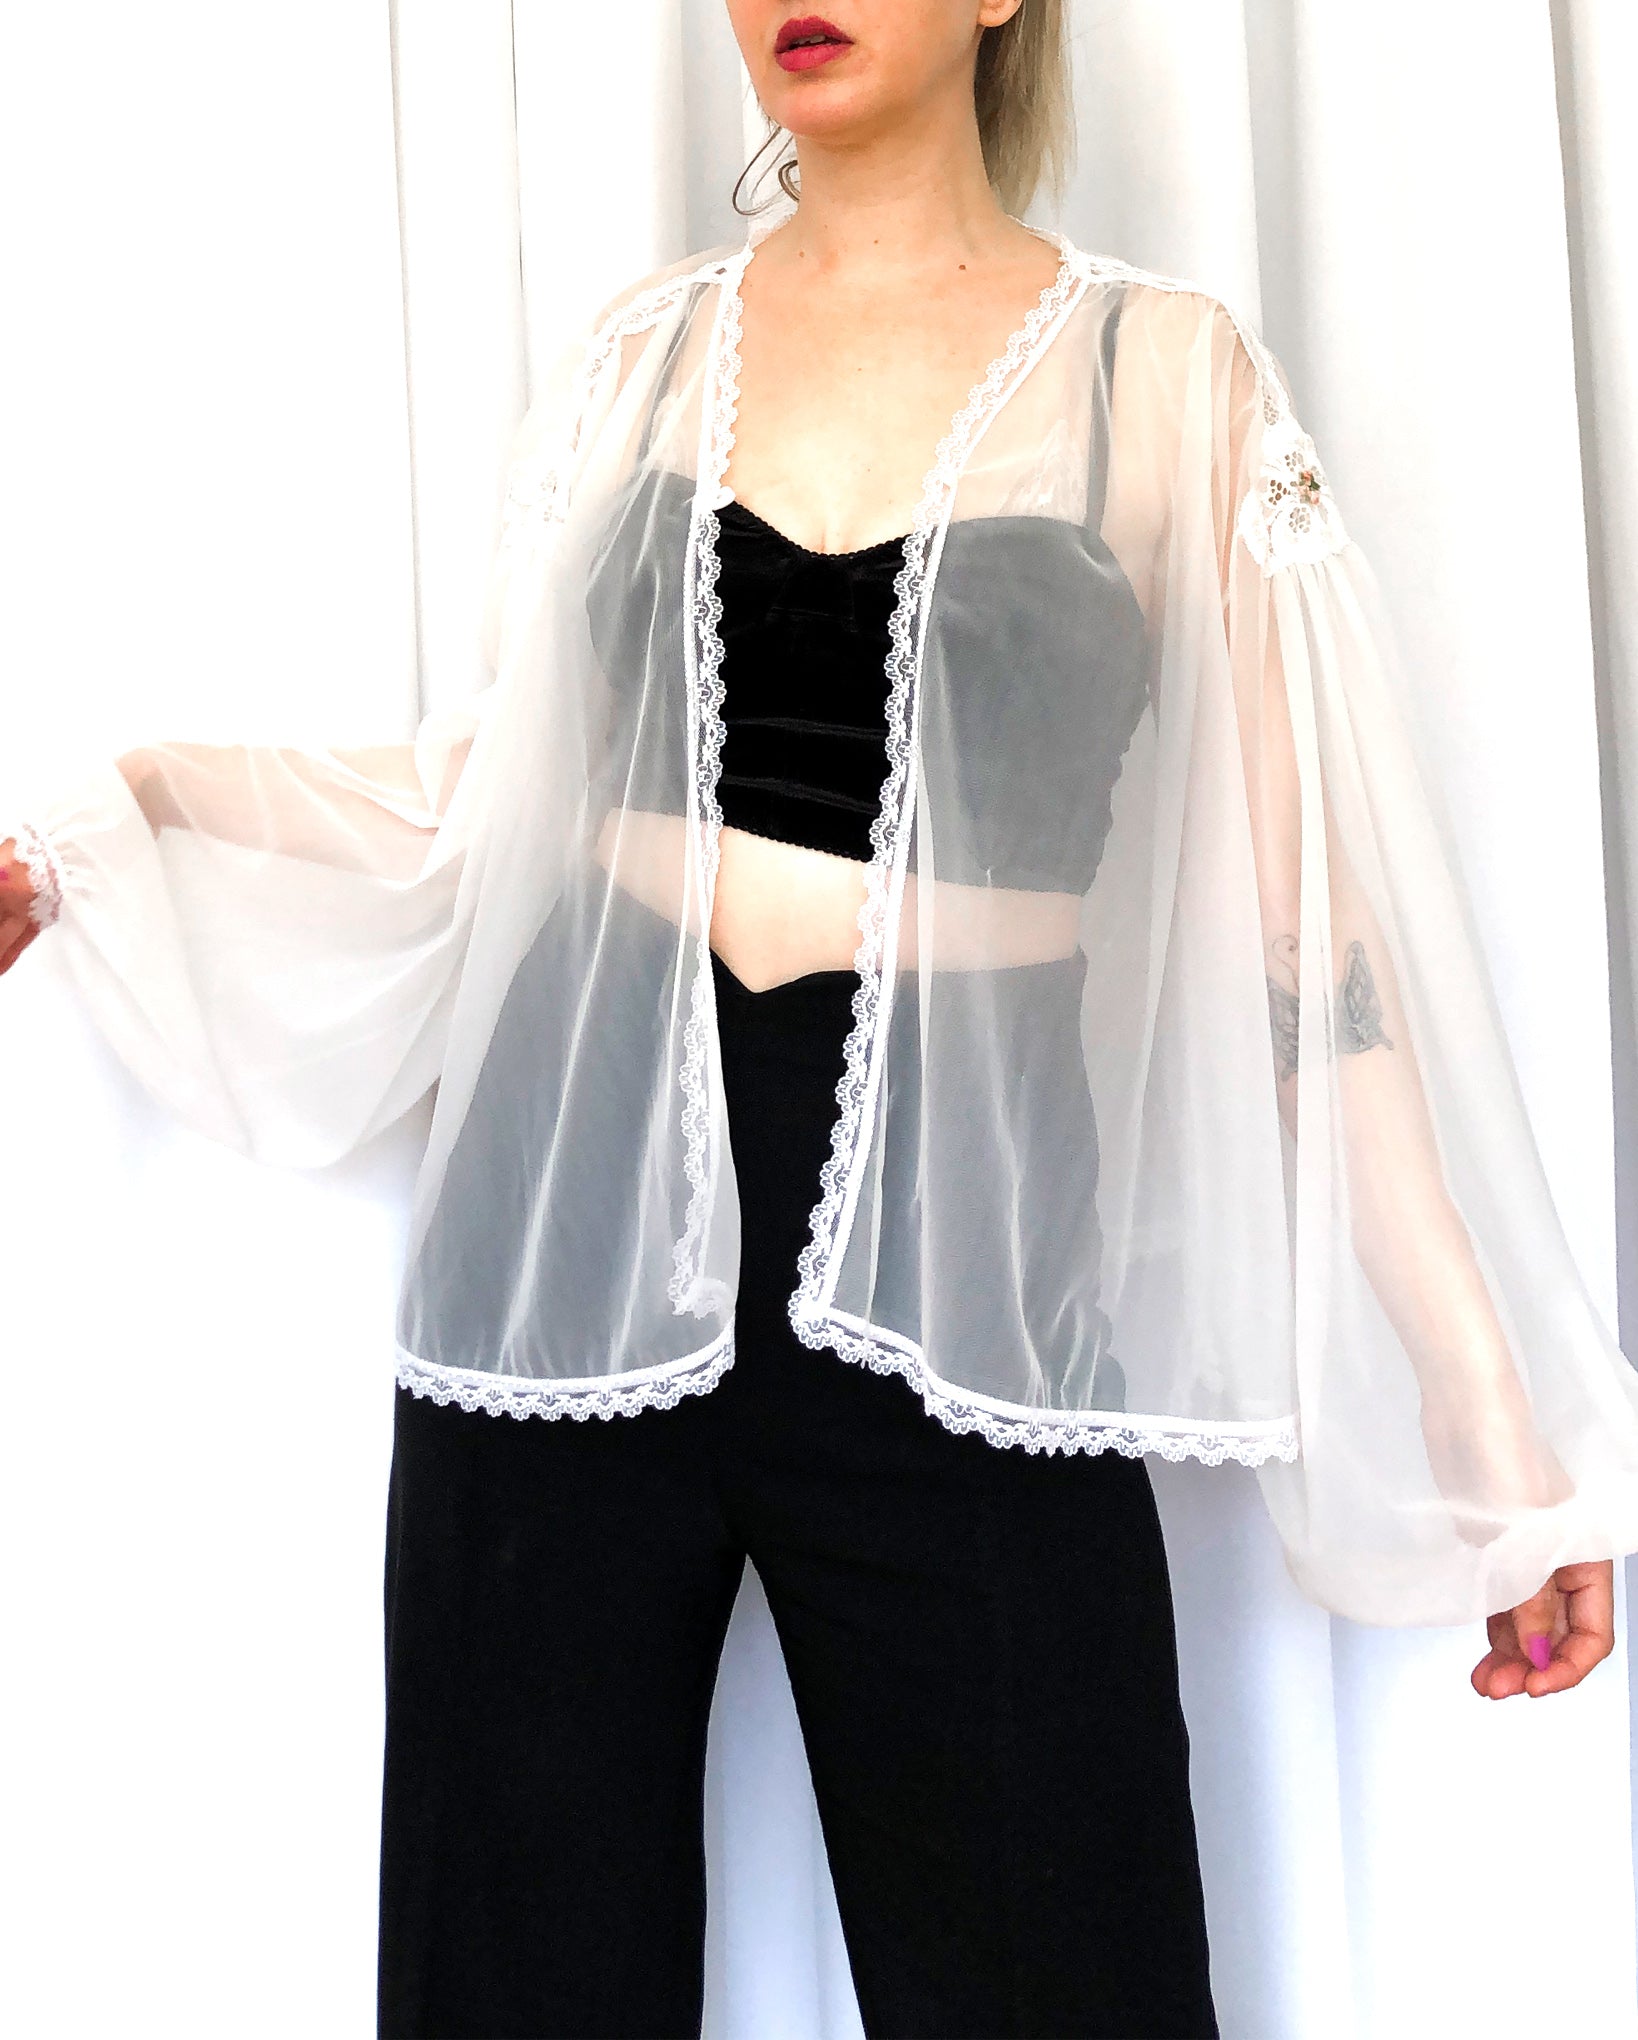 Vintage Sheer White Cover Up Top With Puffy Sleeves and Embroidery Details